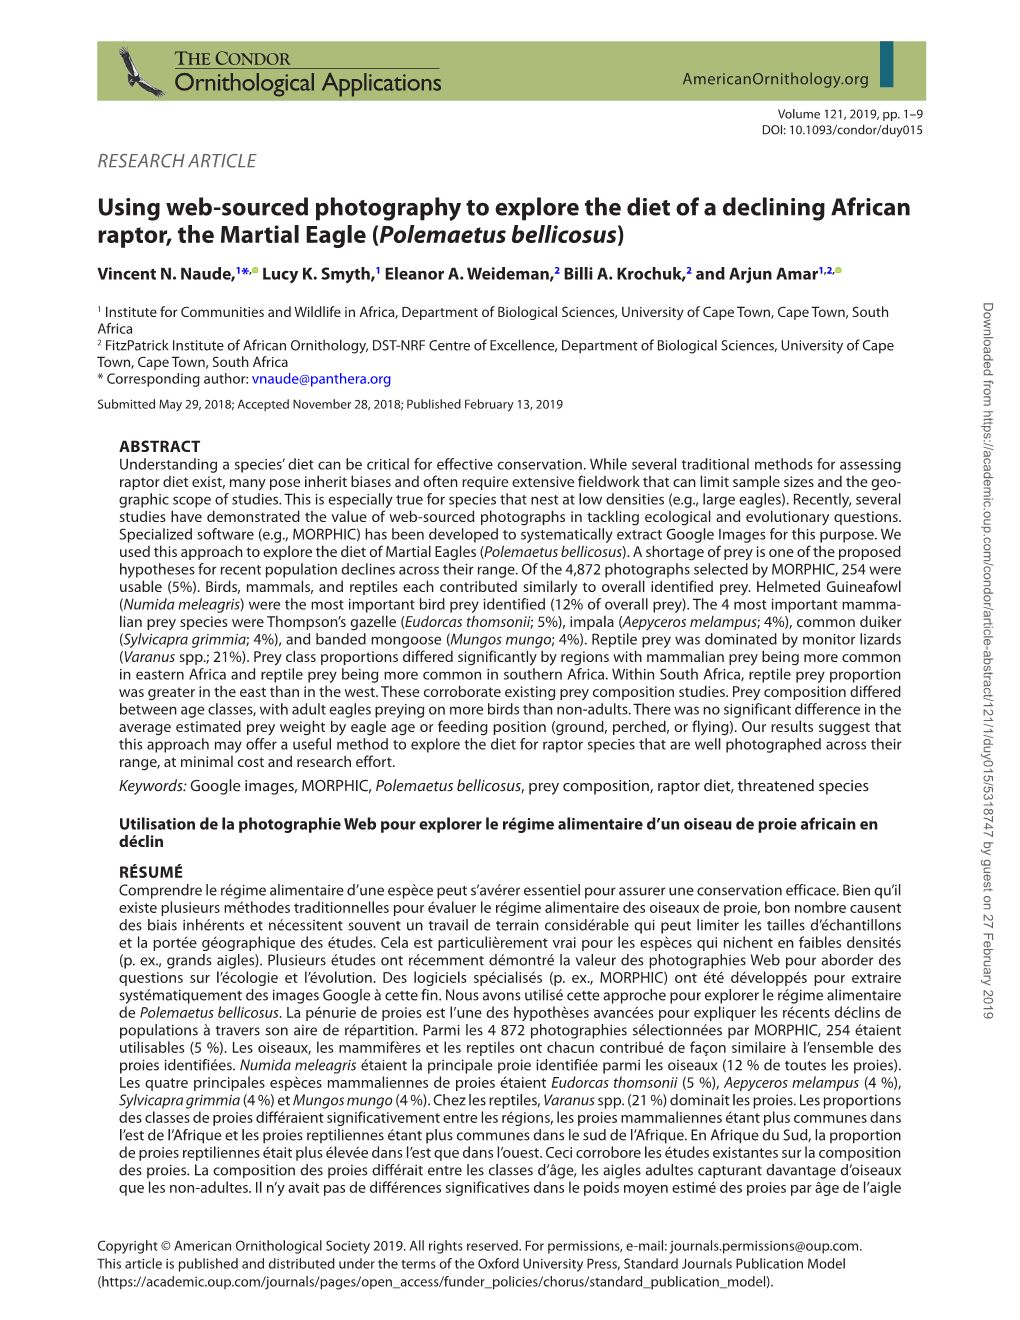 Using Web-Sourced Photography to Explore the Diet of a Declining African Raptor, the Martial Eagle (Polemaetus Bellicosus) Vincent N